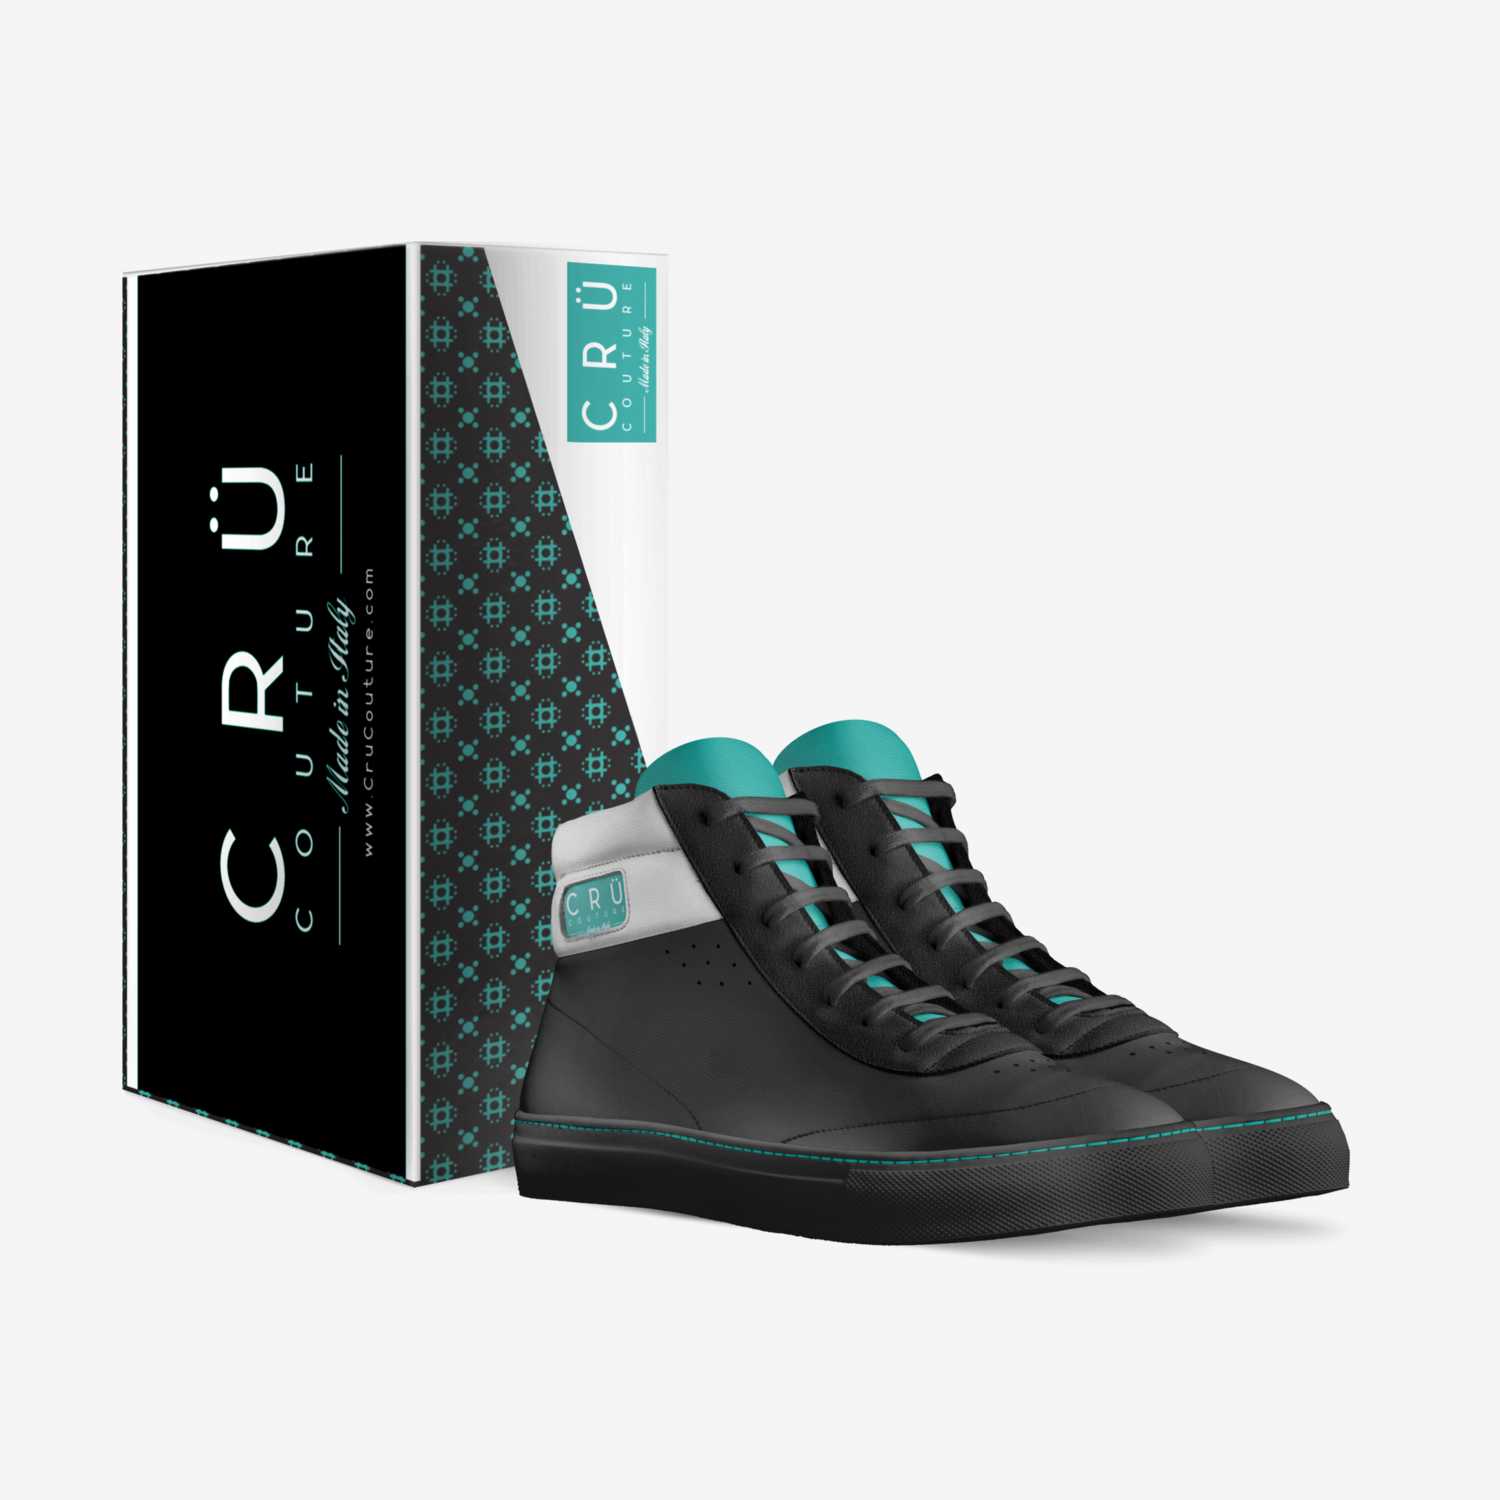 CRÜ BLCK OÜT custom made in Italy shoes by Corey Guilbault | Box view